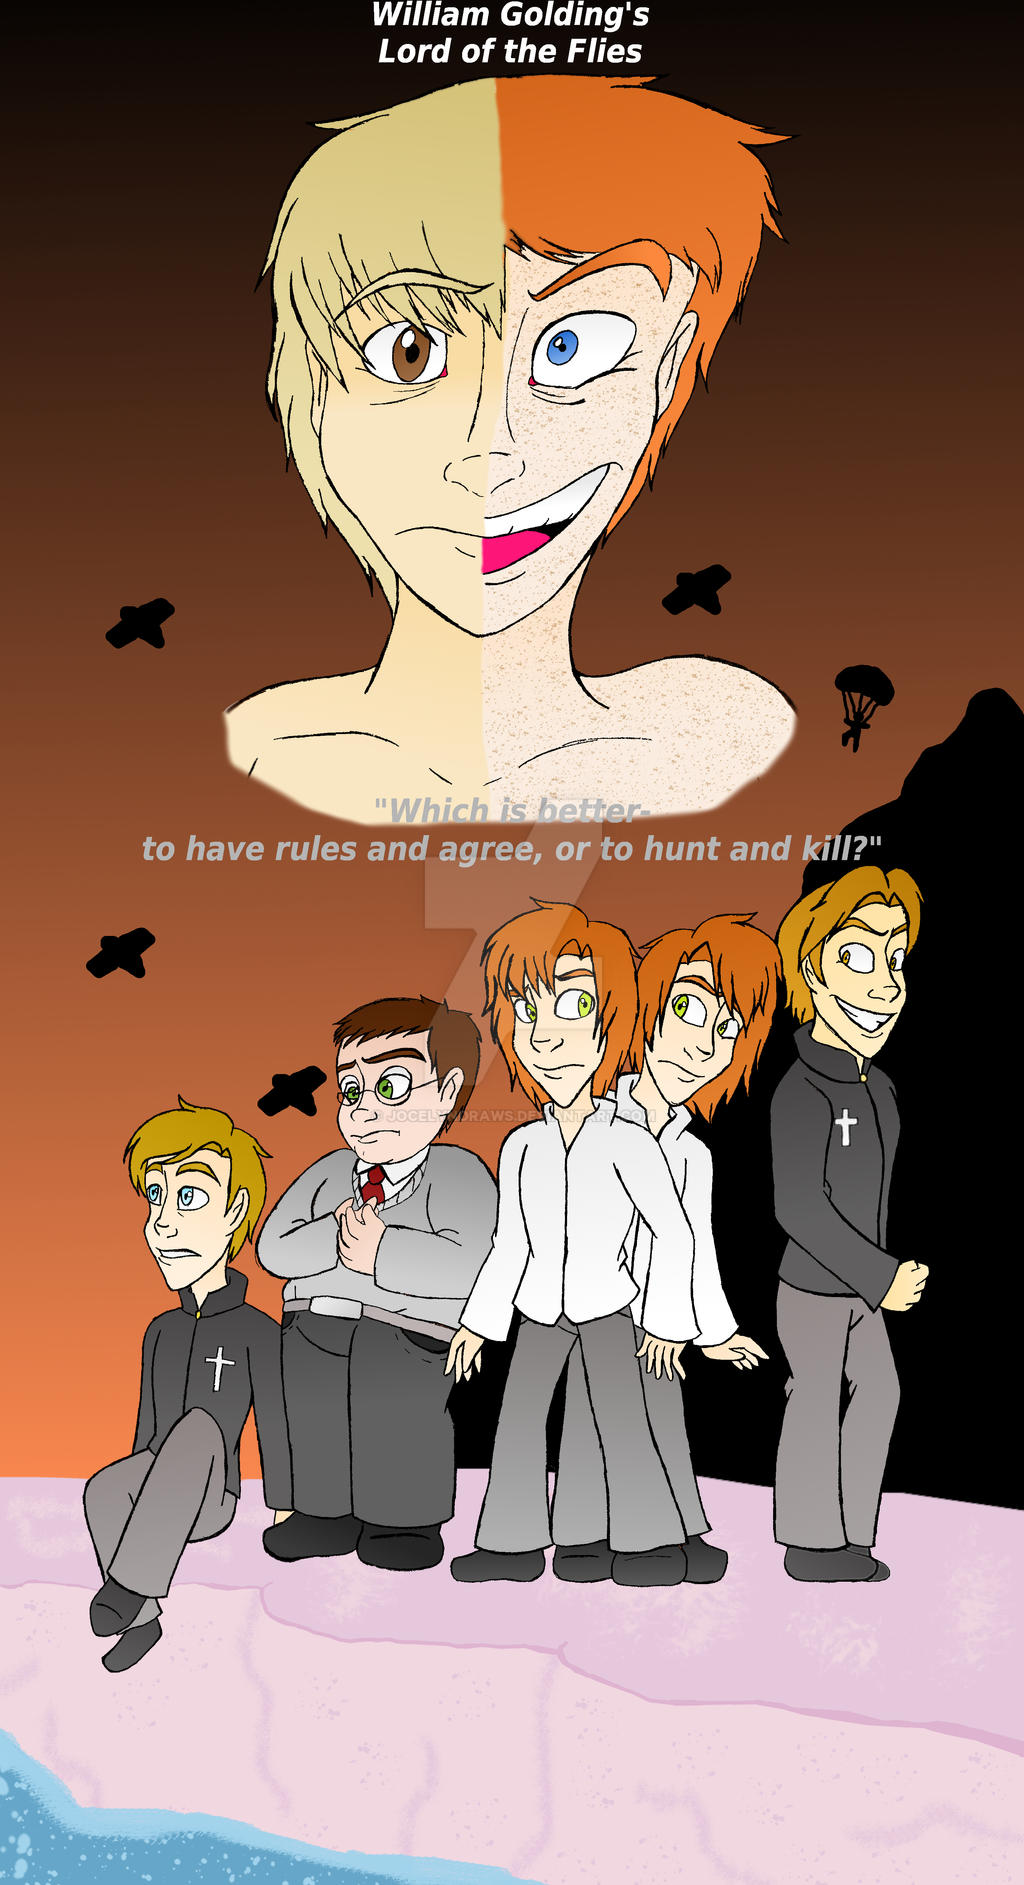 Lord of the Flies movie poster by JocelynDraws on DeviantArt